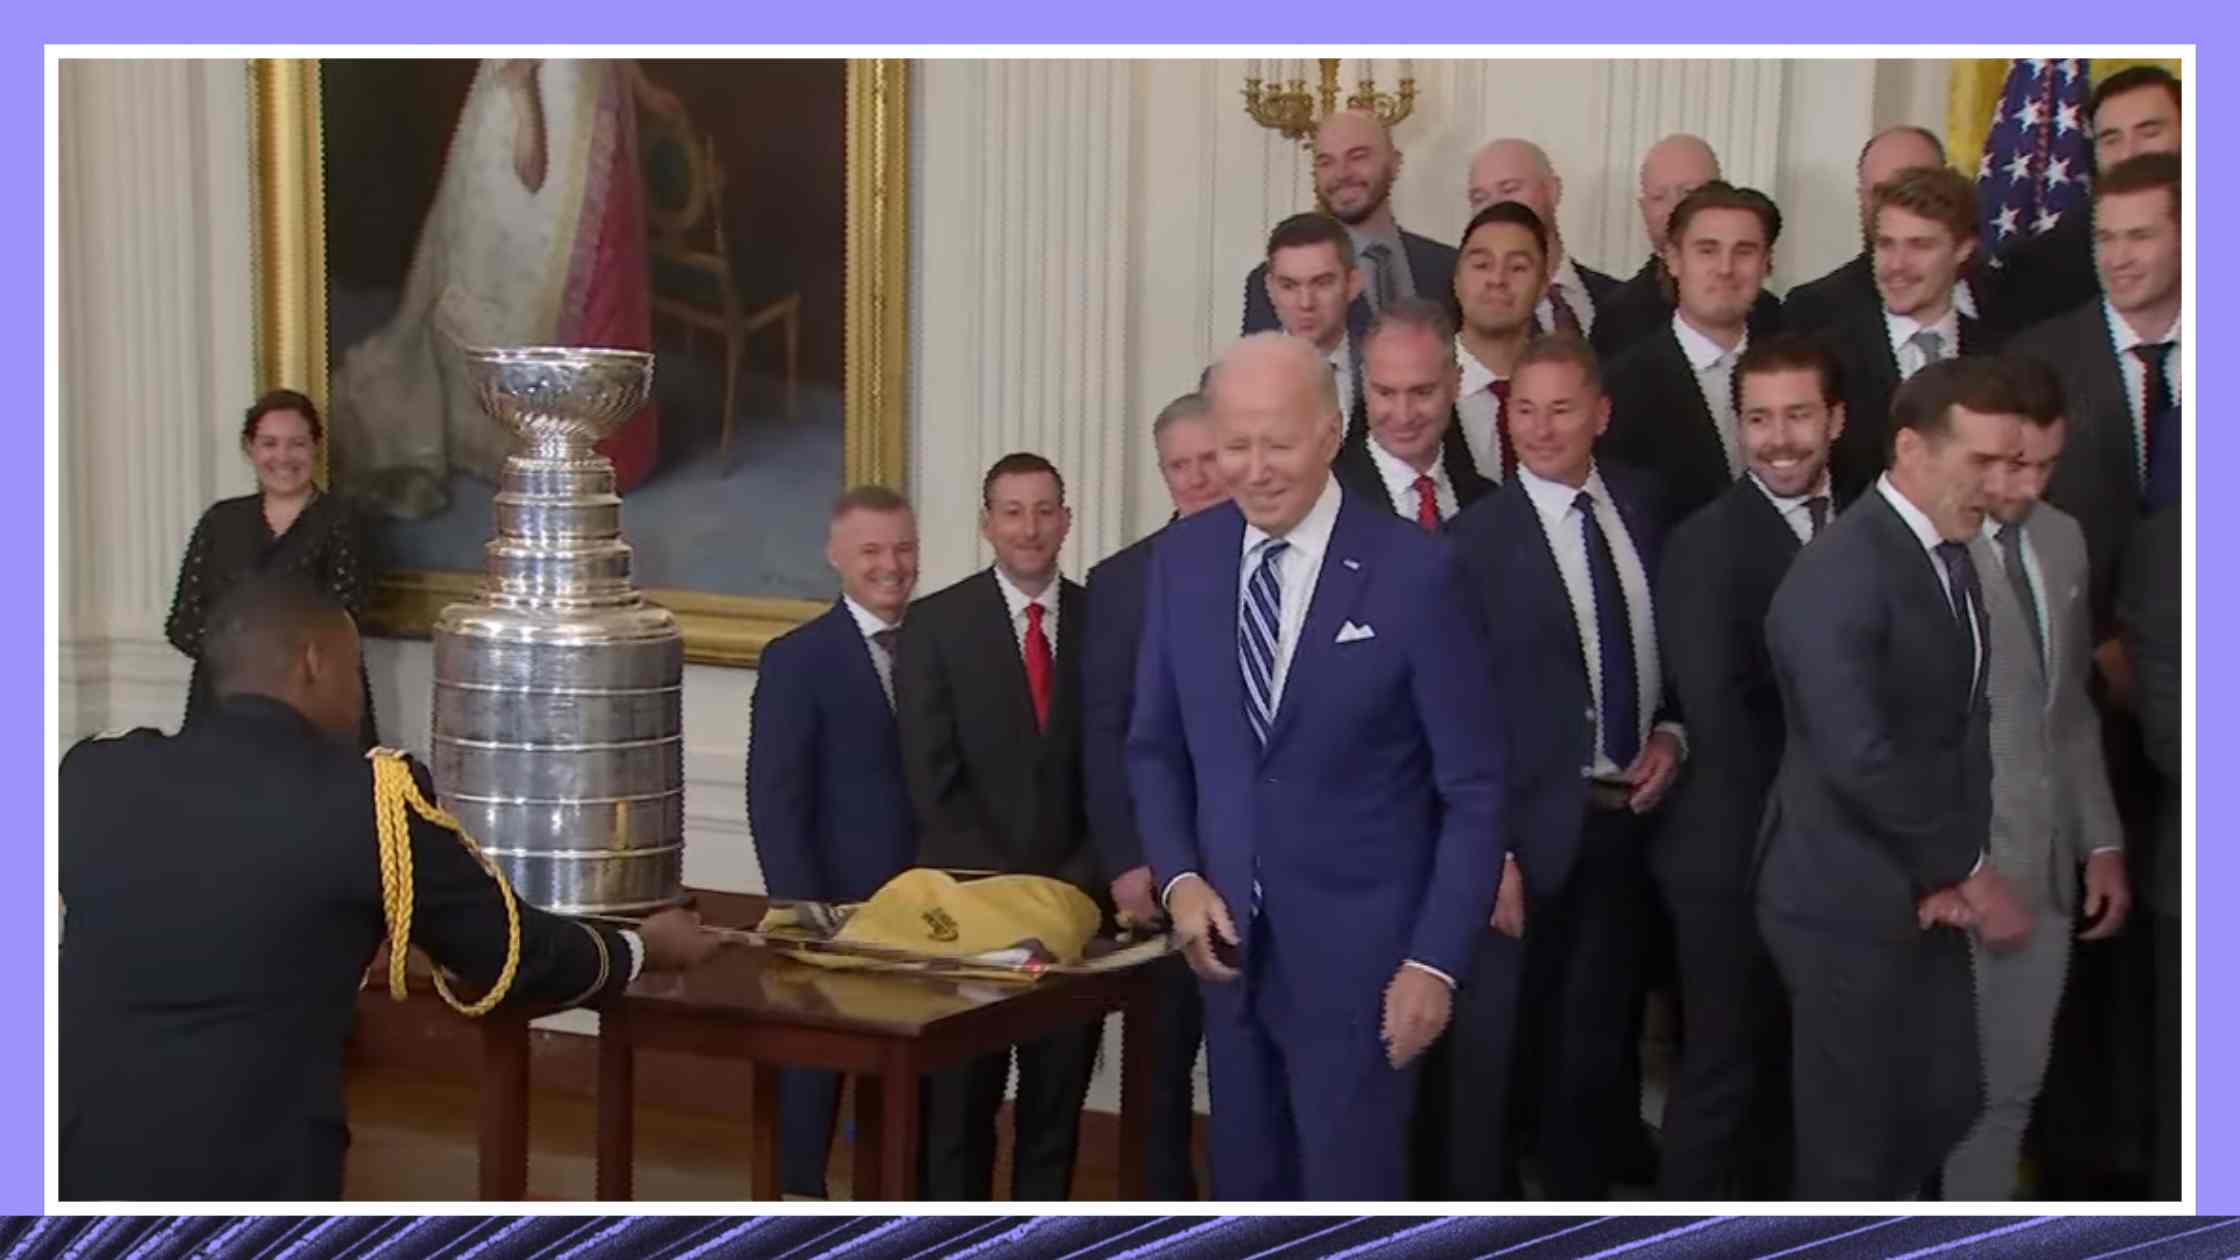 Biden Welcomes Stanley Cup Champions, the Las Vegas Golden Knights, to the White House Transcript